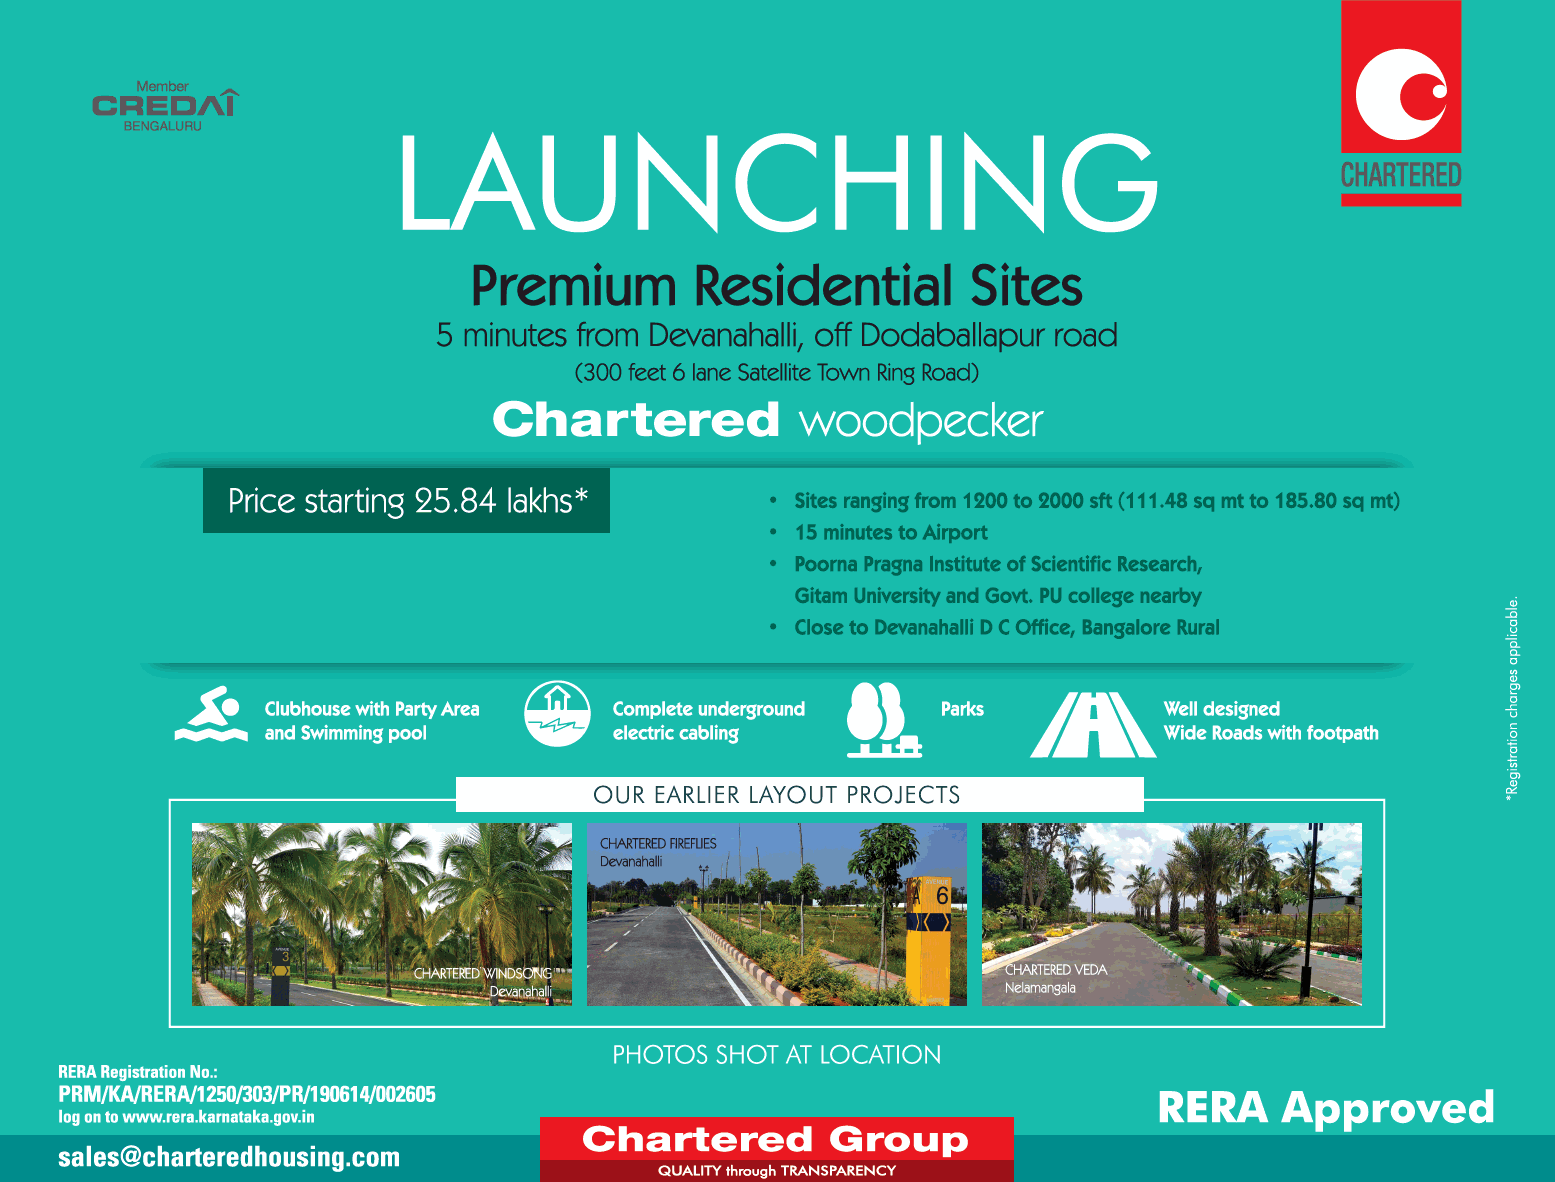 Chartered Woodpecker launching premium residential site in Bangalore Update